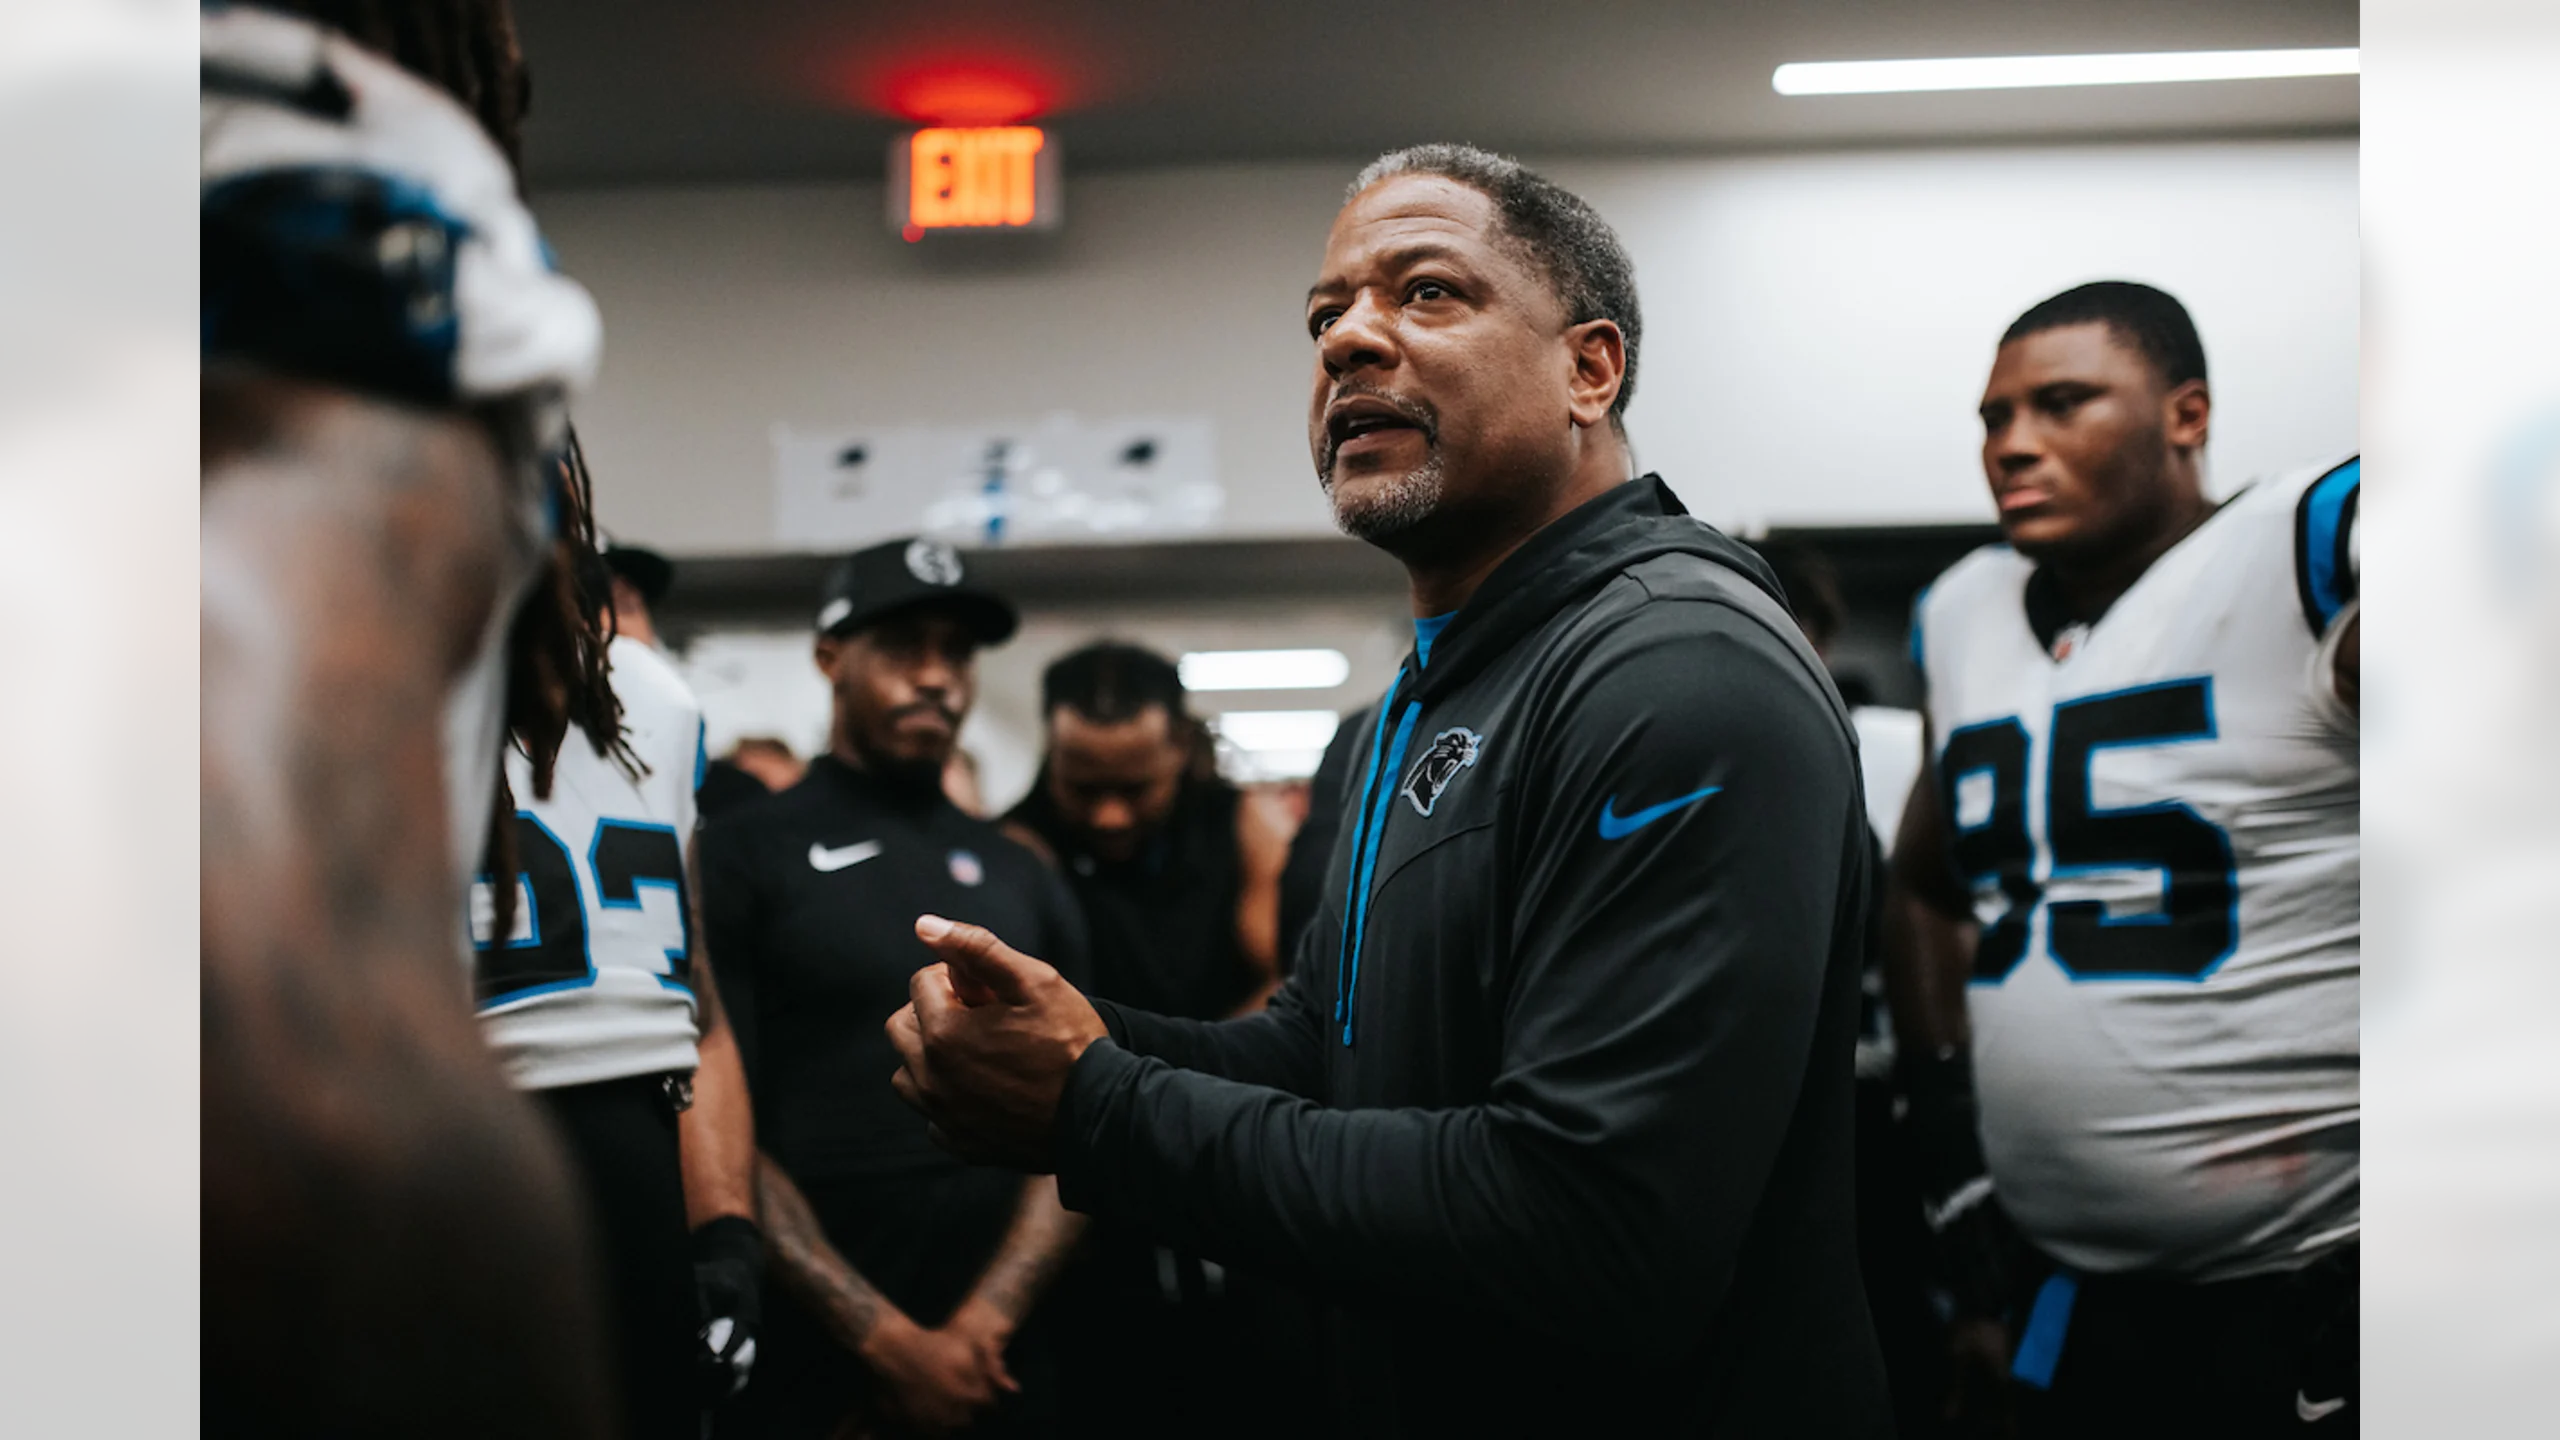 Panthers interim head coach Steve Wilks, a Charlotte native and an Appalachian State alum, took over just five weeks into the season and helped the team gather itself and reorganize over an abundance of adversity. Photo courtesy of the Carolina Panthers